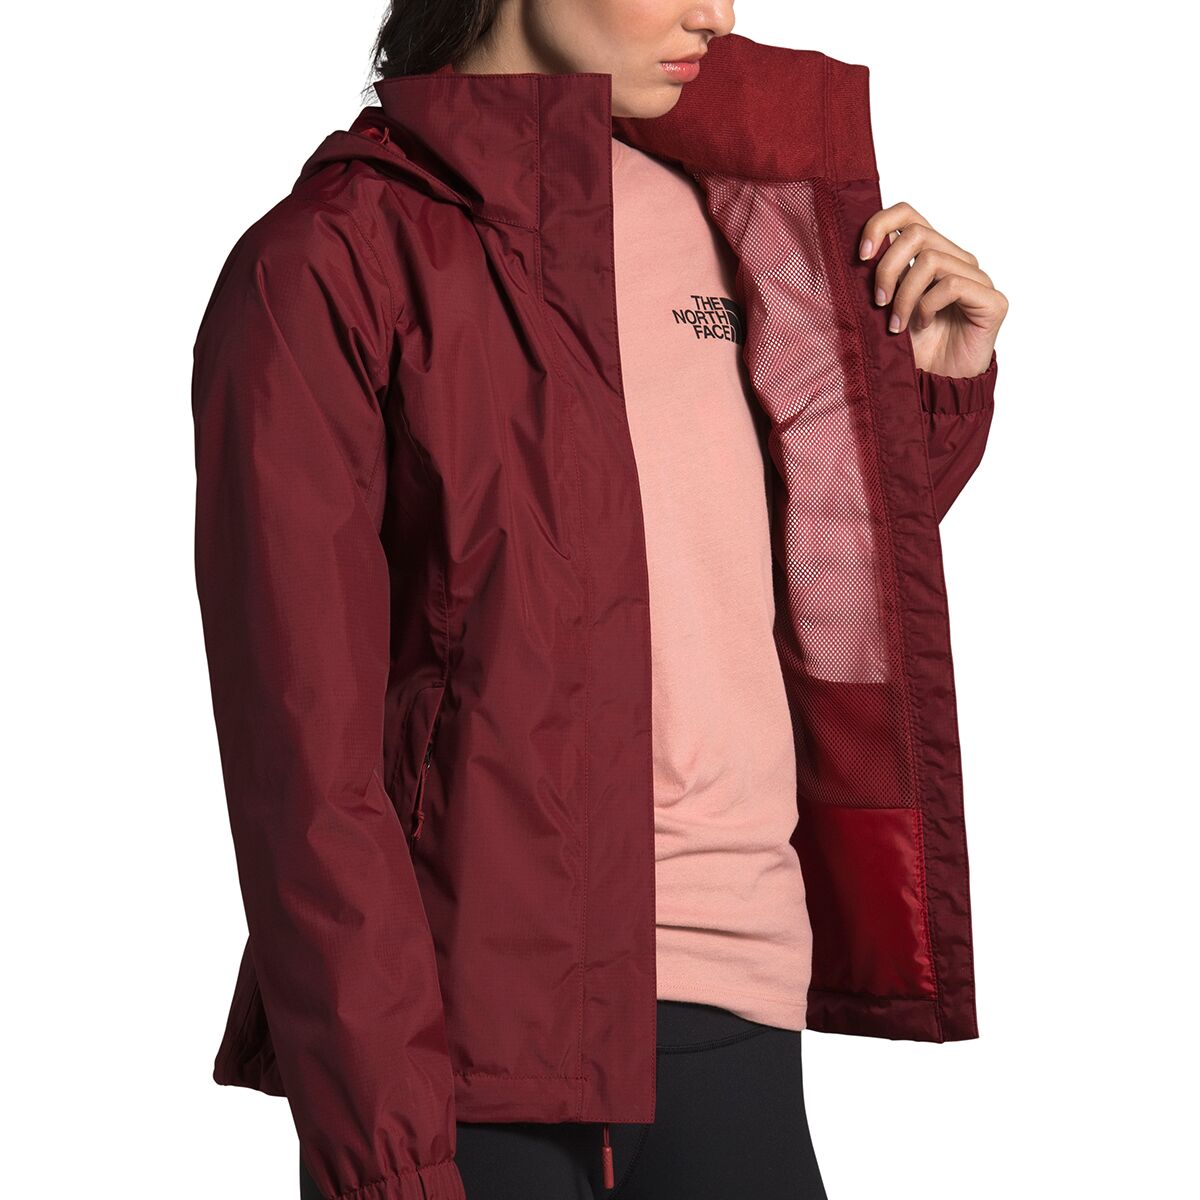 The North Face Resolve 2 Hooded Jacket - Women's - Women